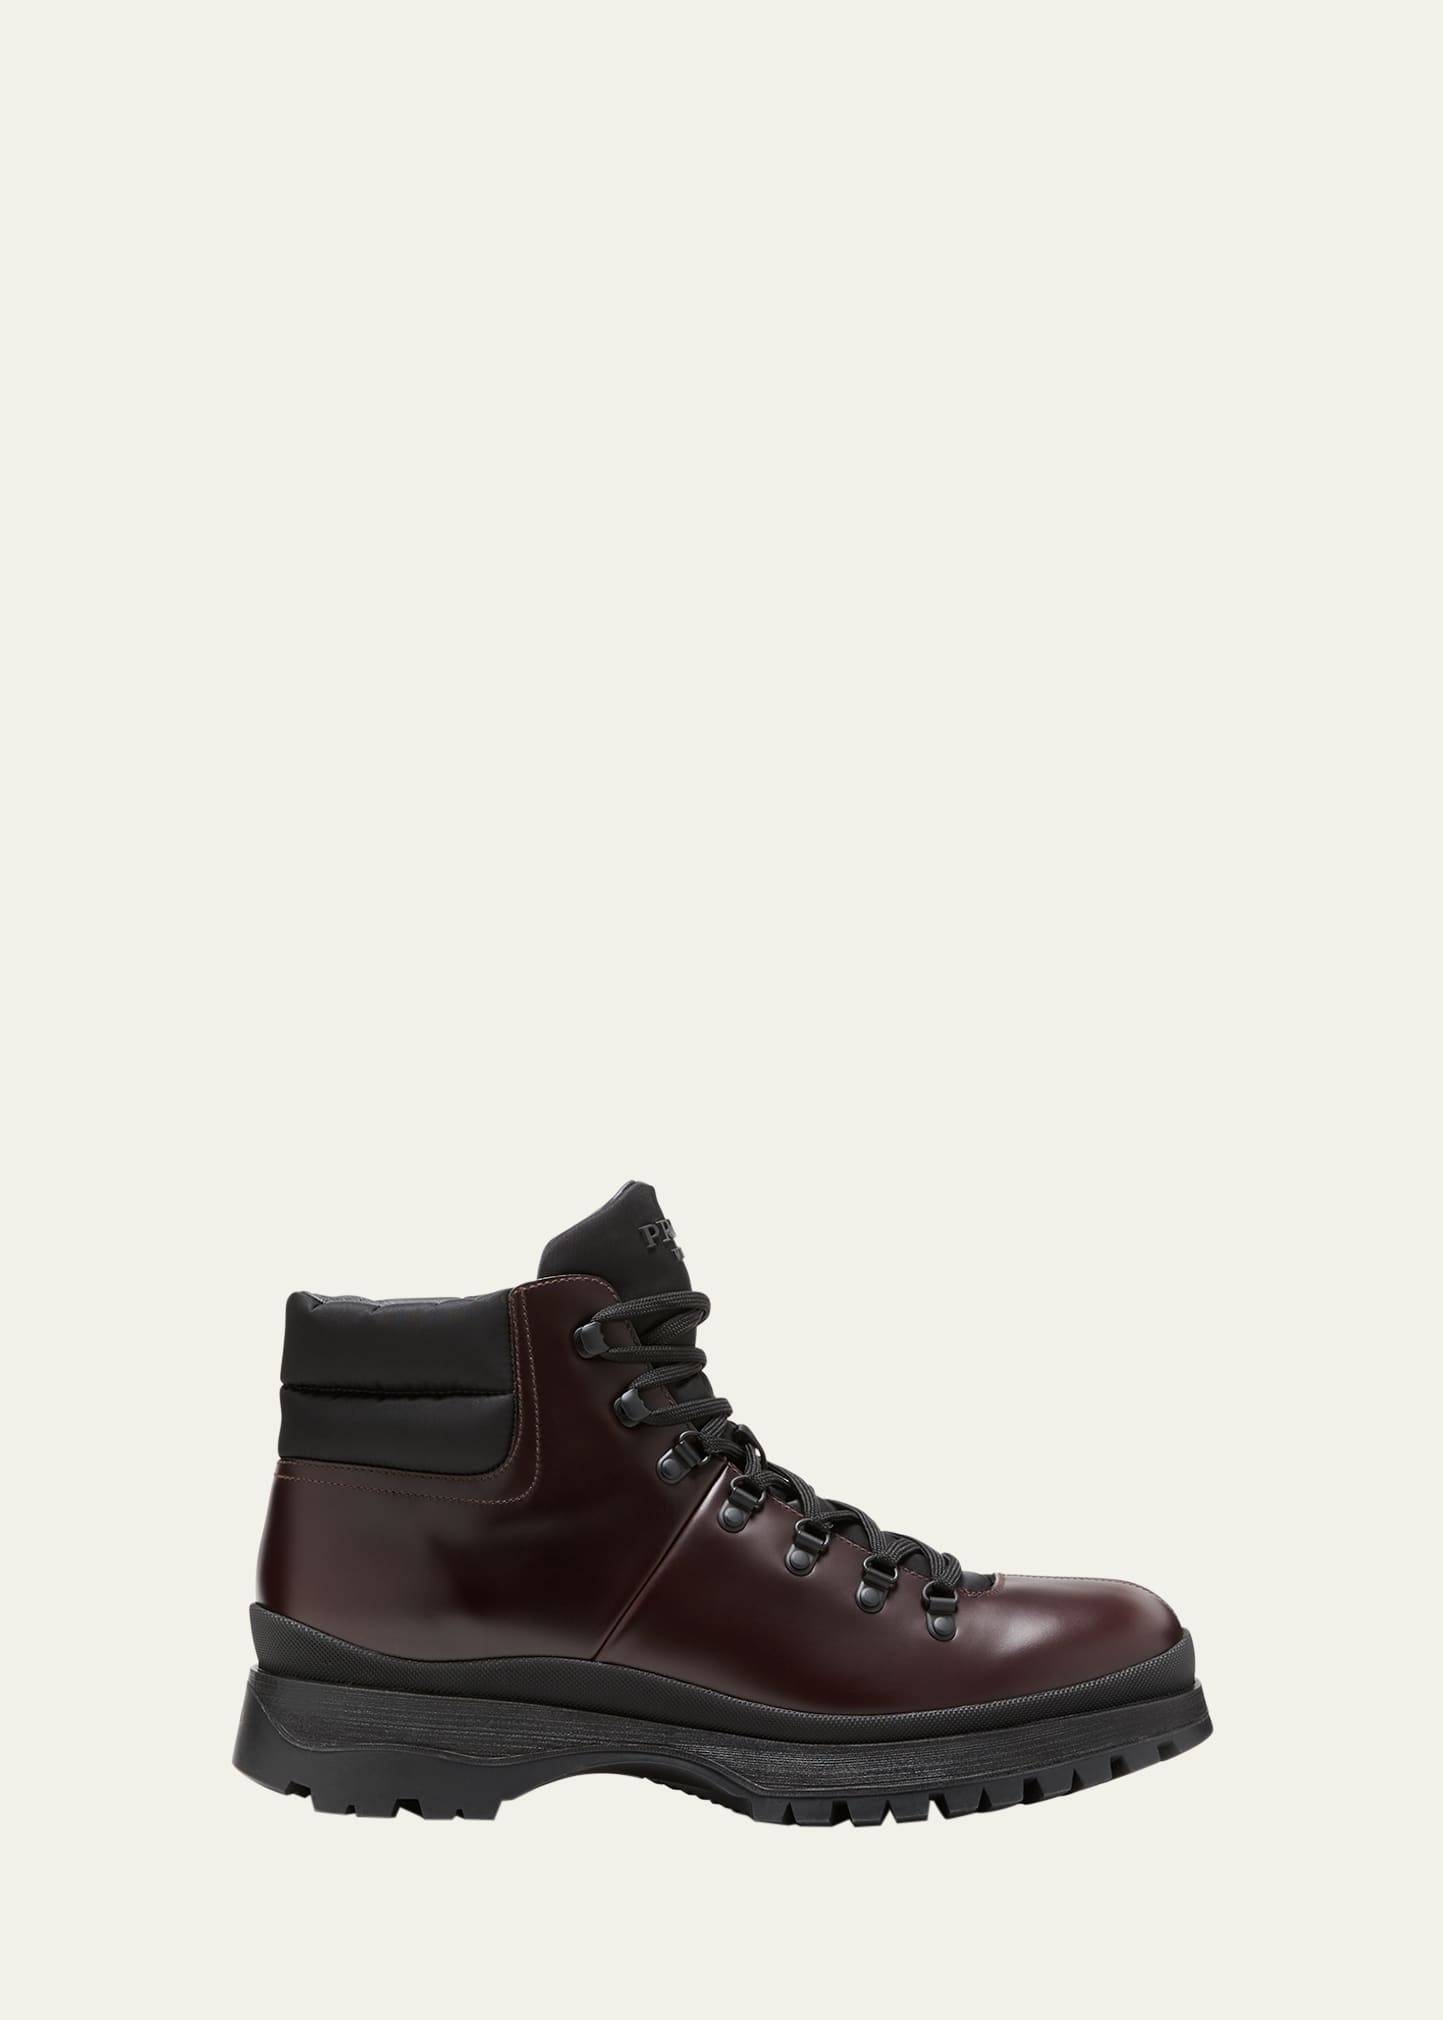 Shop Prada Men's Brucciato Leather Lace-up Hiking Boots In Brown